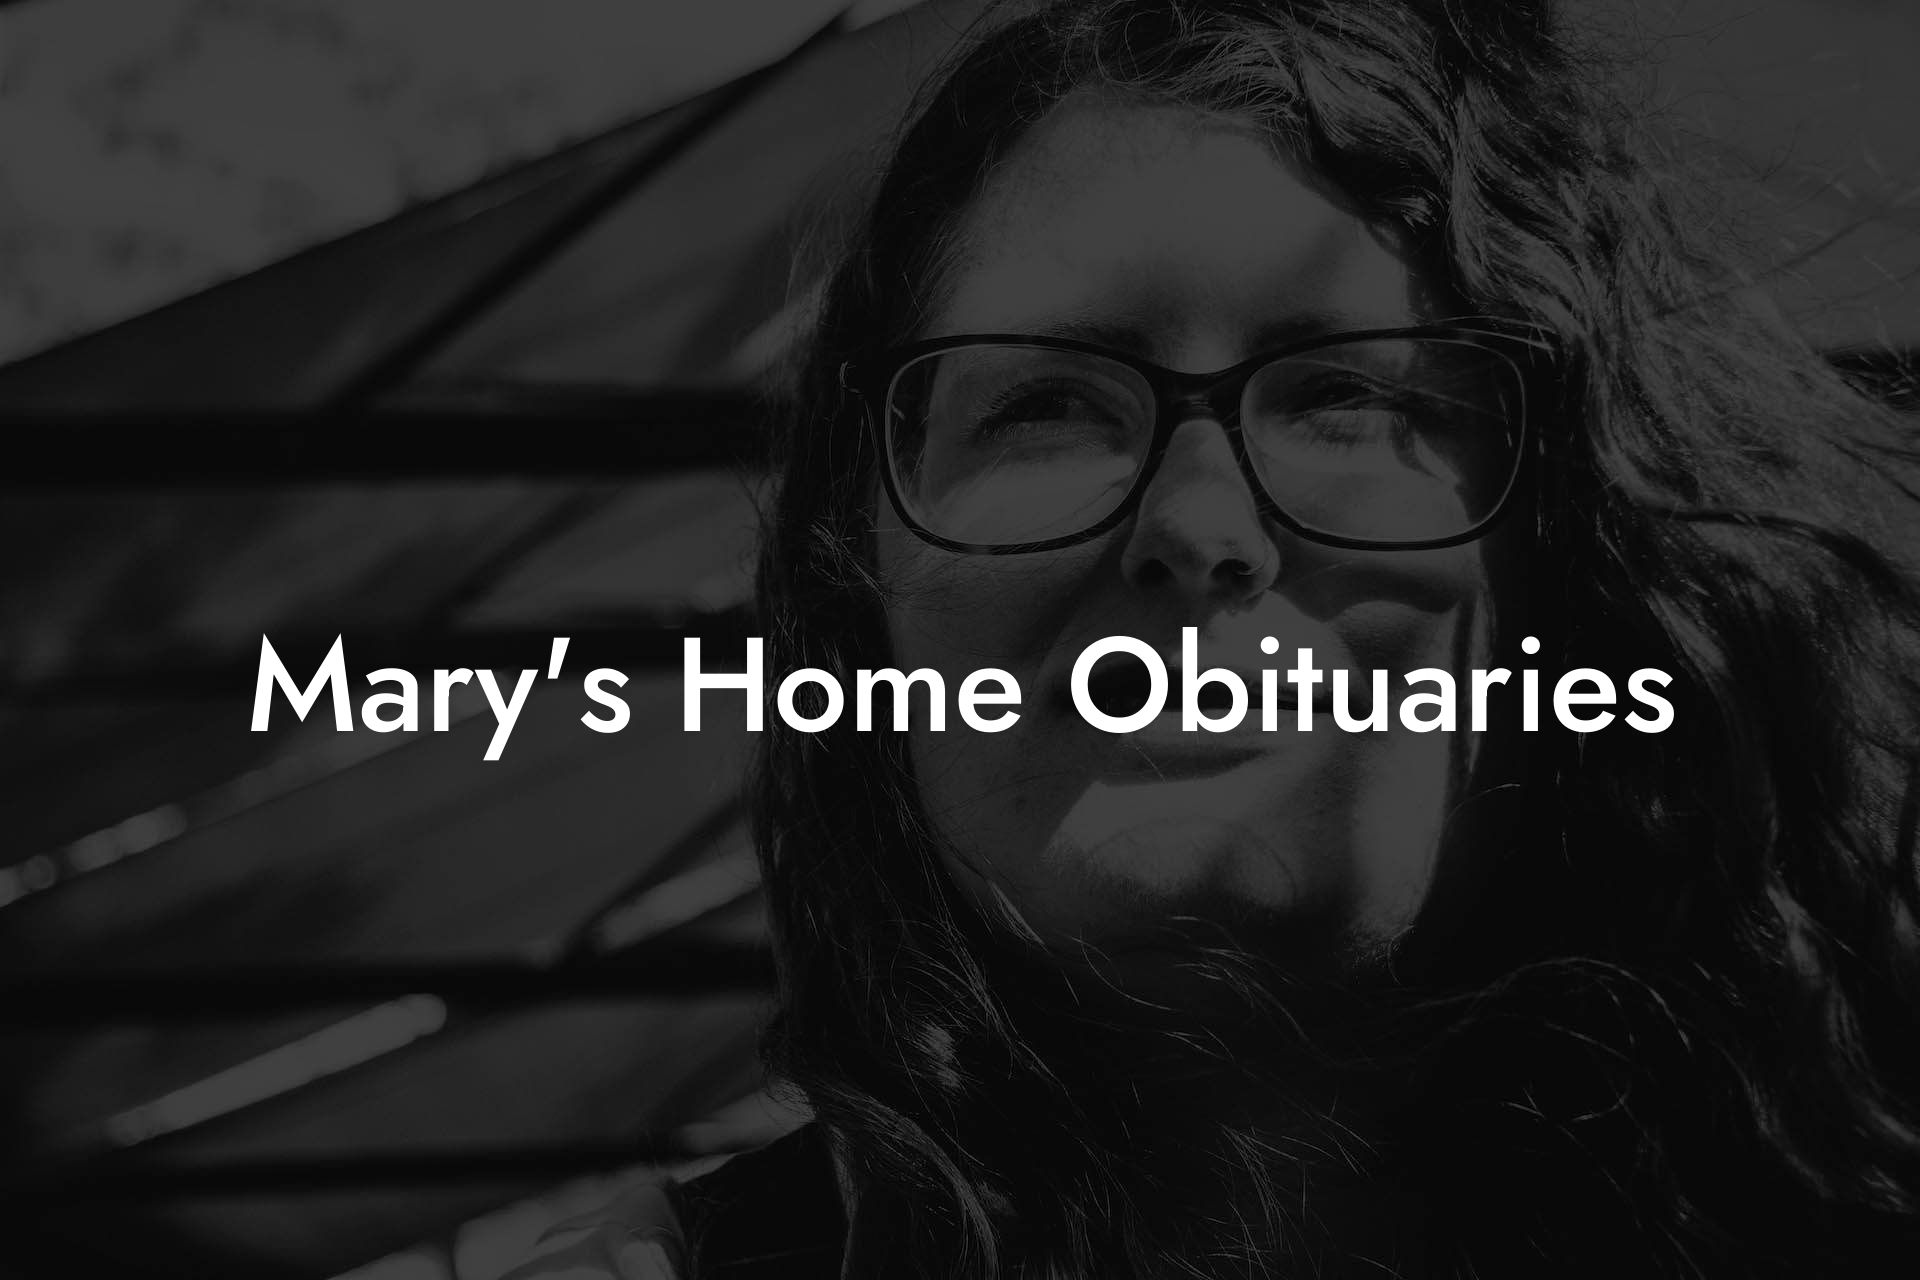 Mary's Home Obituaries